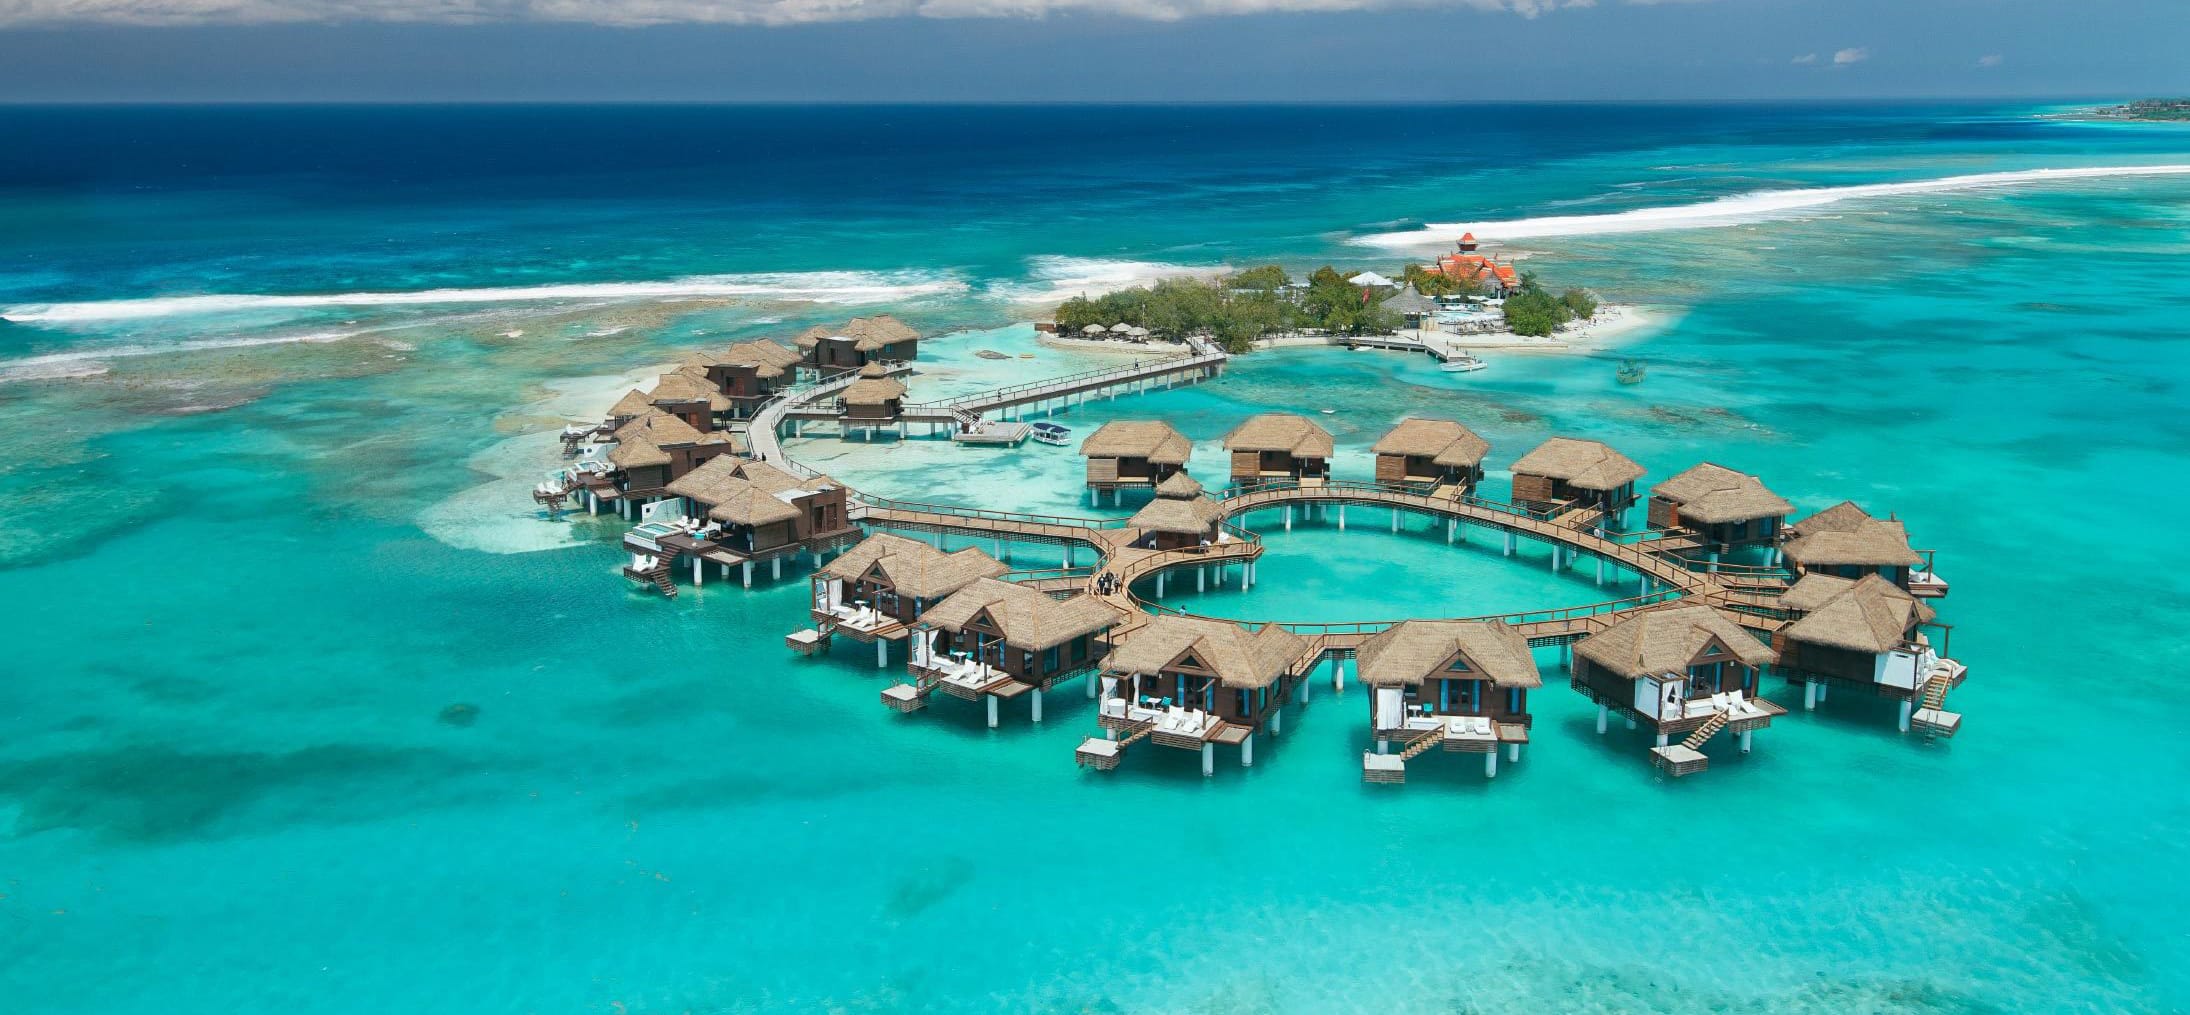 Overwater bungalows.